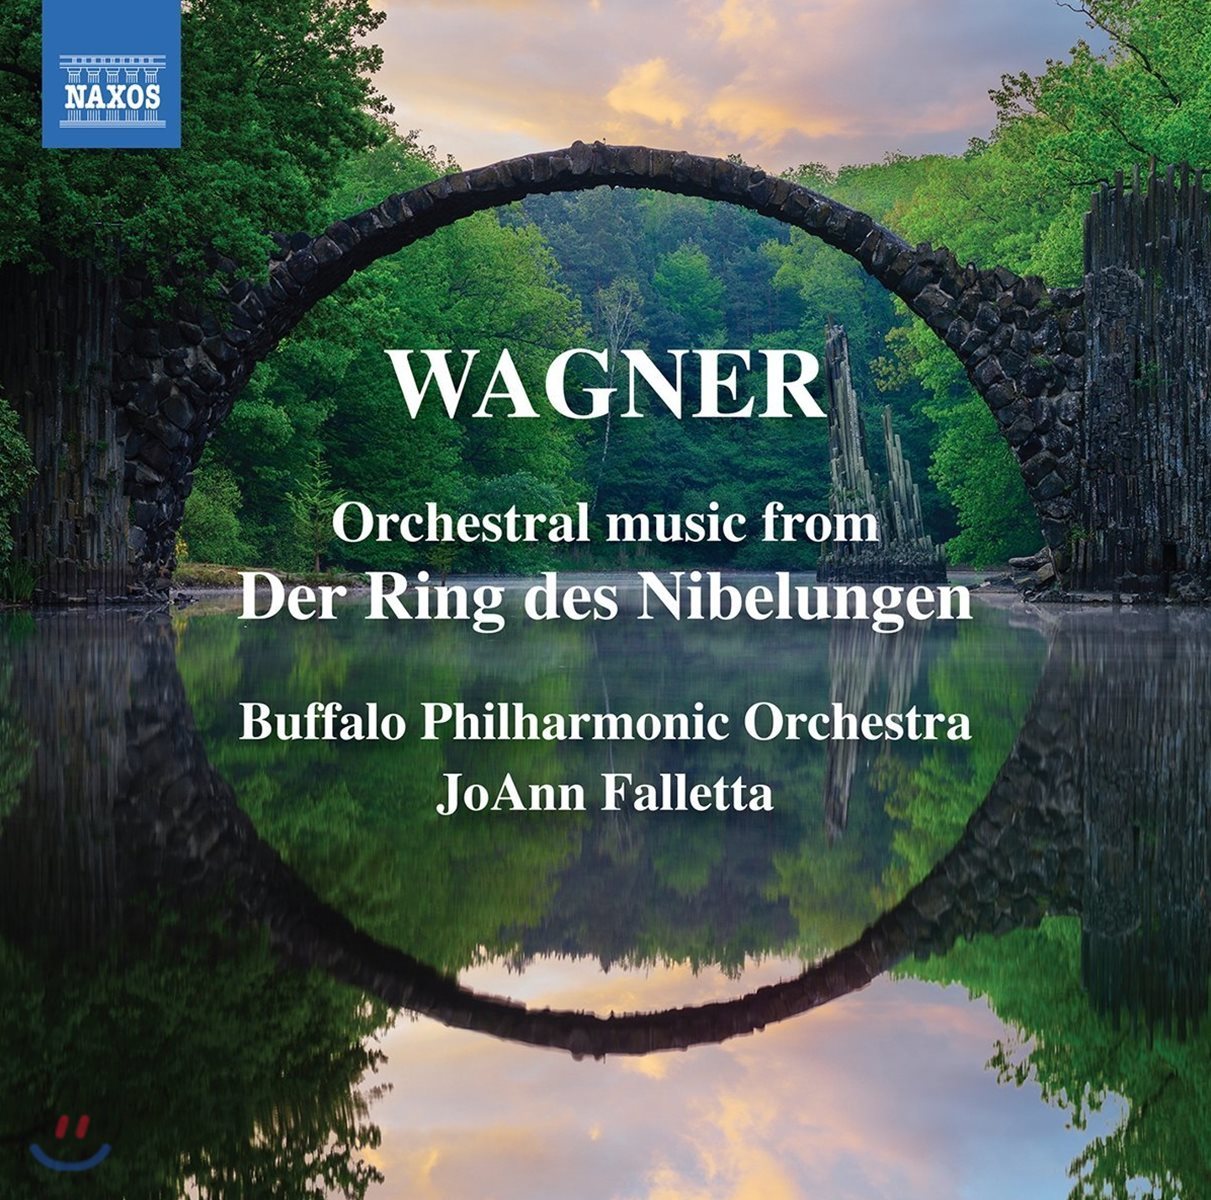 JoAnn Falletta 바그너: 니벨룽의 반지 [관현악 버전 발췌] (Wagner: Orchestral Music from The Ring)